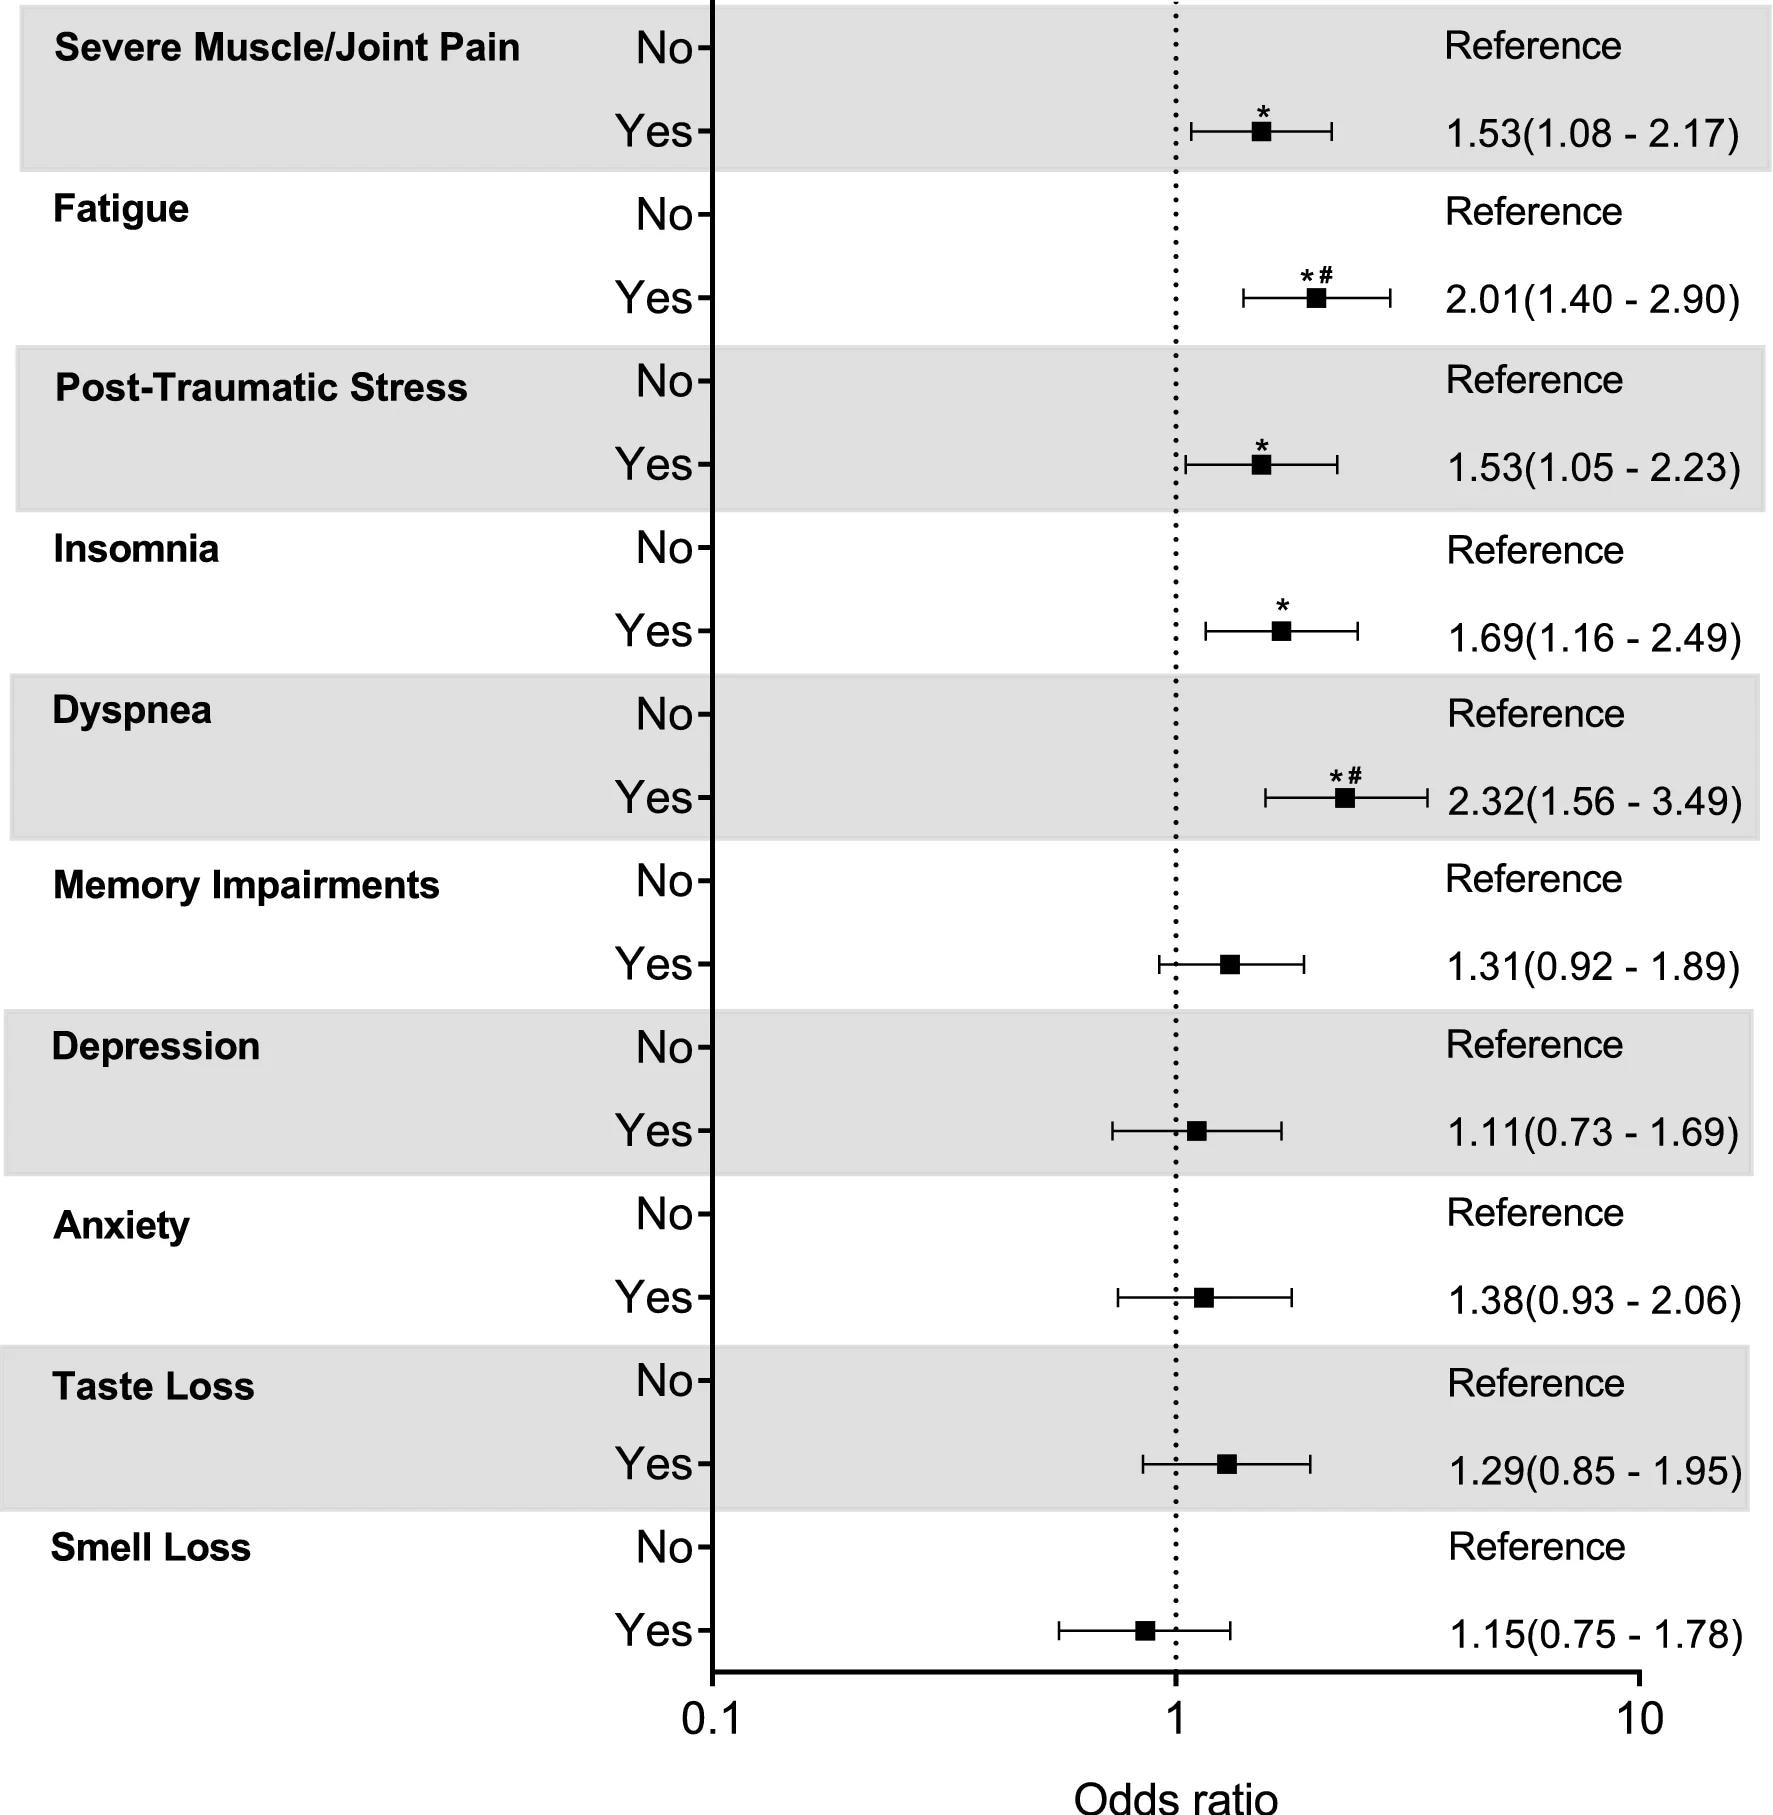 Multivariate-adjusted logistic regression analyses (odds ratio [(95% CI]) of the association between persistent symptoms related to COVID-19 (Severe muscle/joint pain, fatigue, post-traumatic stress, insomnia, dyspnea, memory impairments, depression, anxiety, taste loss, and smell loss) with physical inactivity (< 150 min/week of moderate-to-vigorous activity). *Unadjusted P < 0.05; # adjusted P < 0.005 (Bonferroni correction).